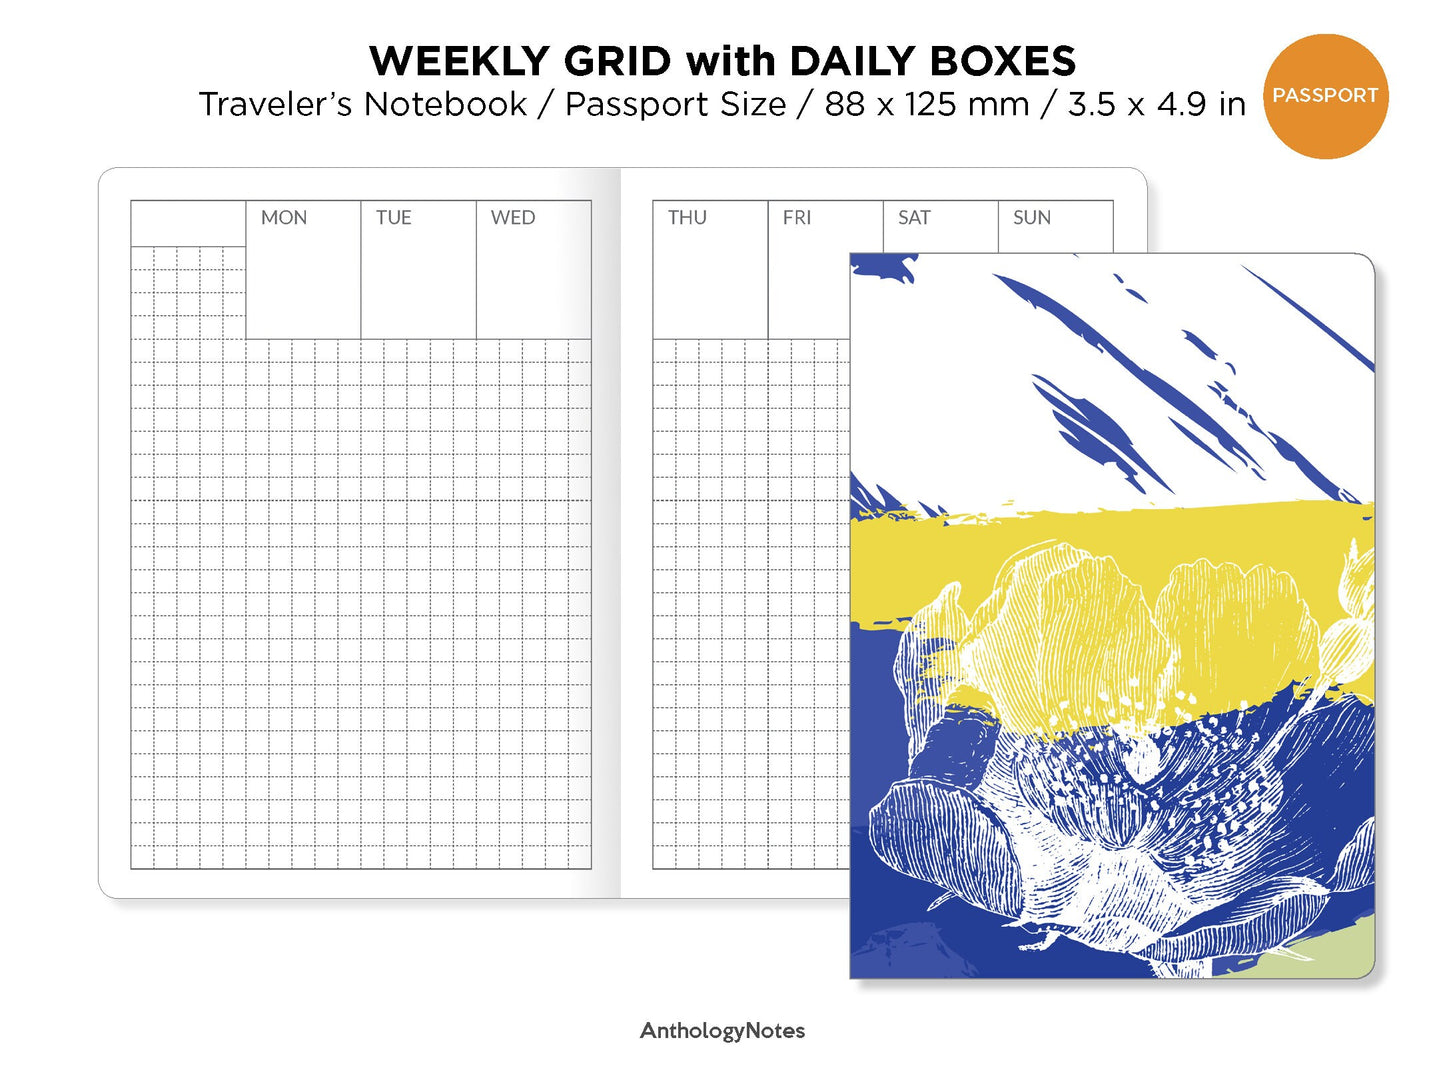 PASSPORT Weekly Grid with DAILY BOXES Printable Insert Traveler's Notebook